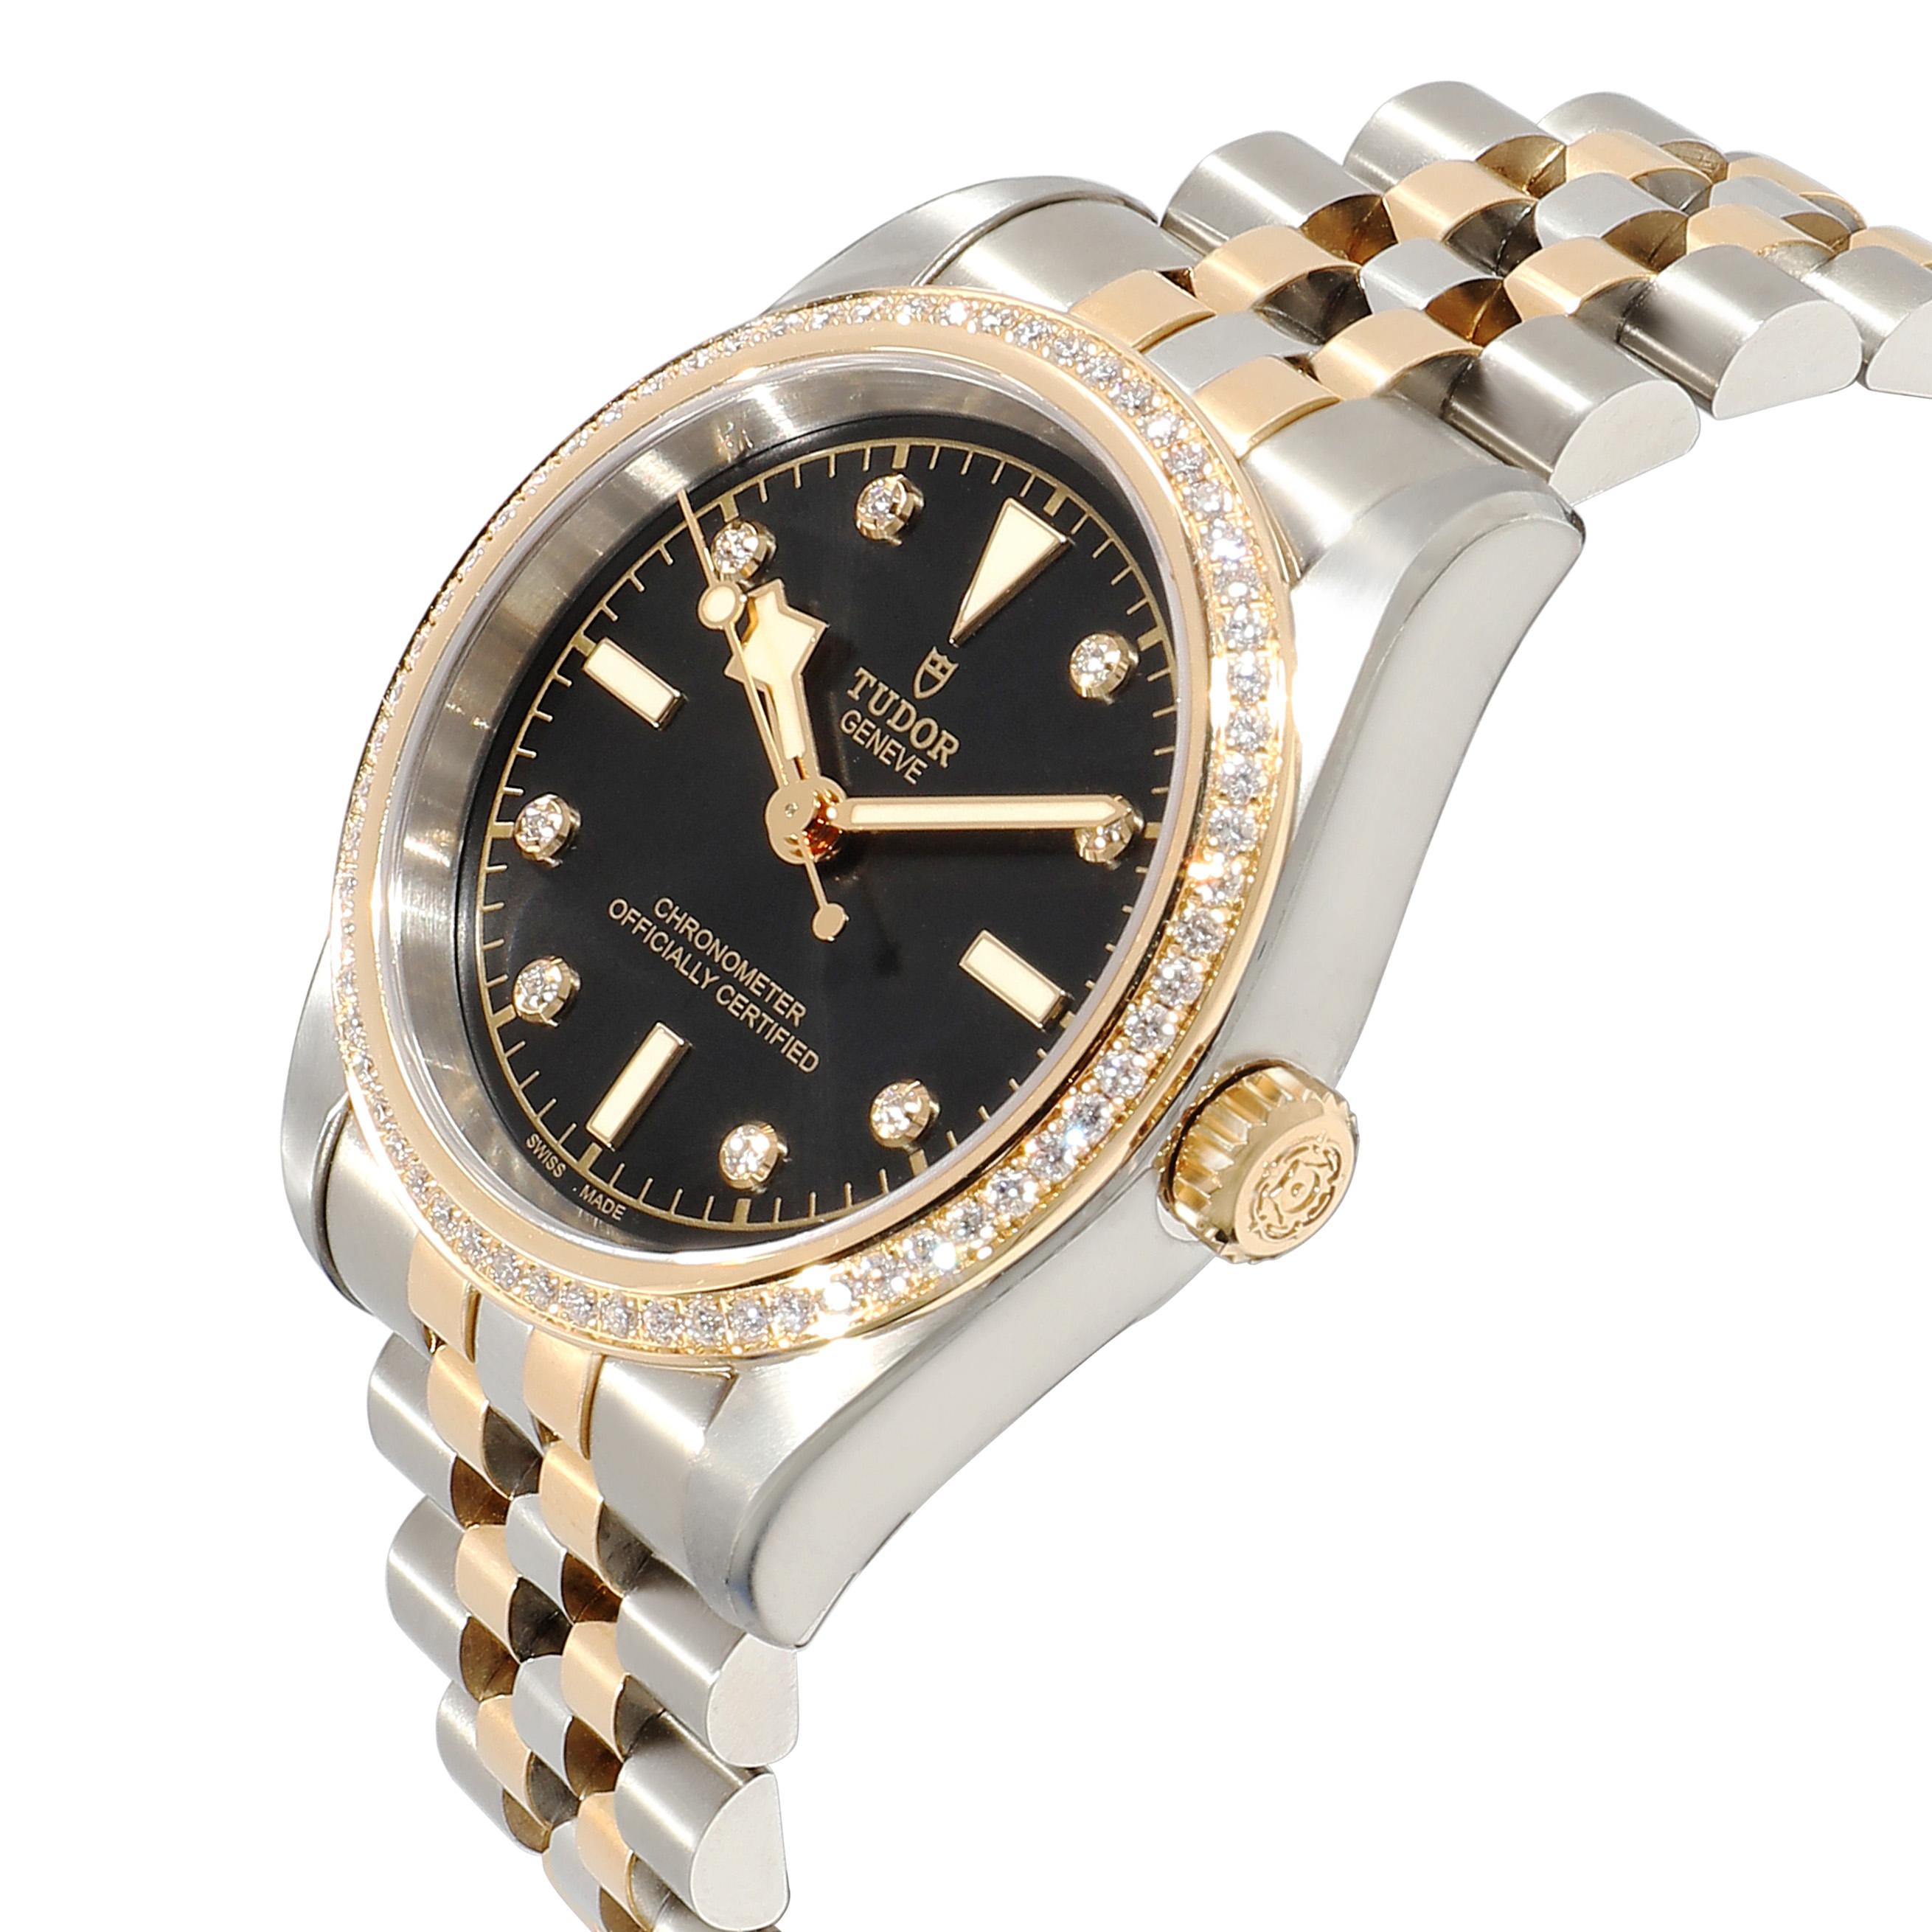 Tudor Black Bay 31 S&G 79613 Women's Watch in 18kt Stainless Steel/Yellow Gold In Excellent Condition For Sale In New York, NY